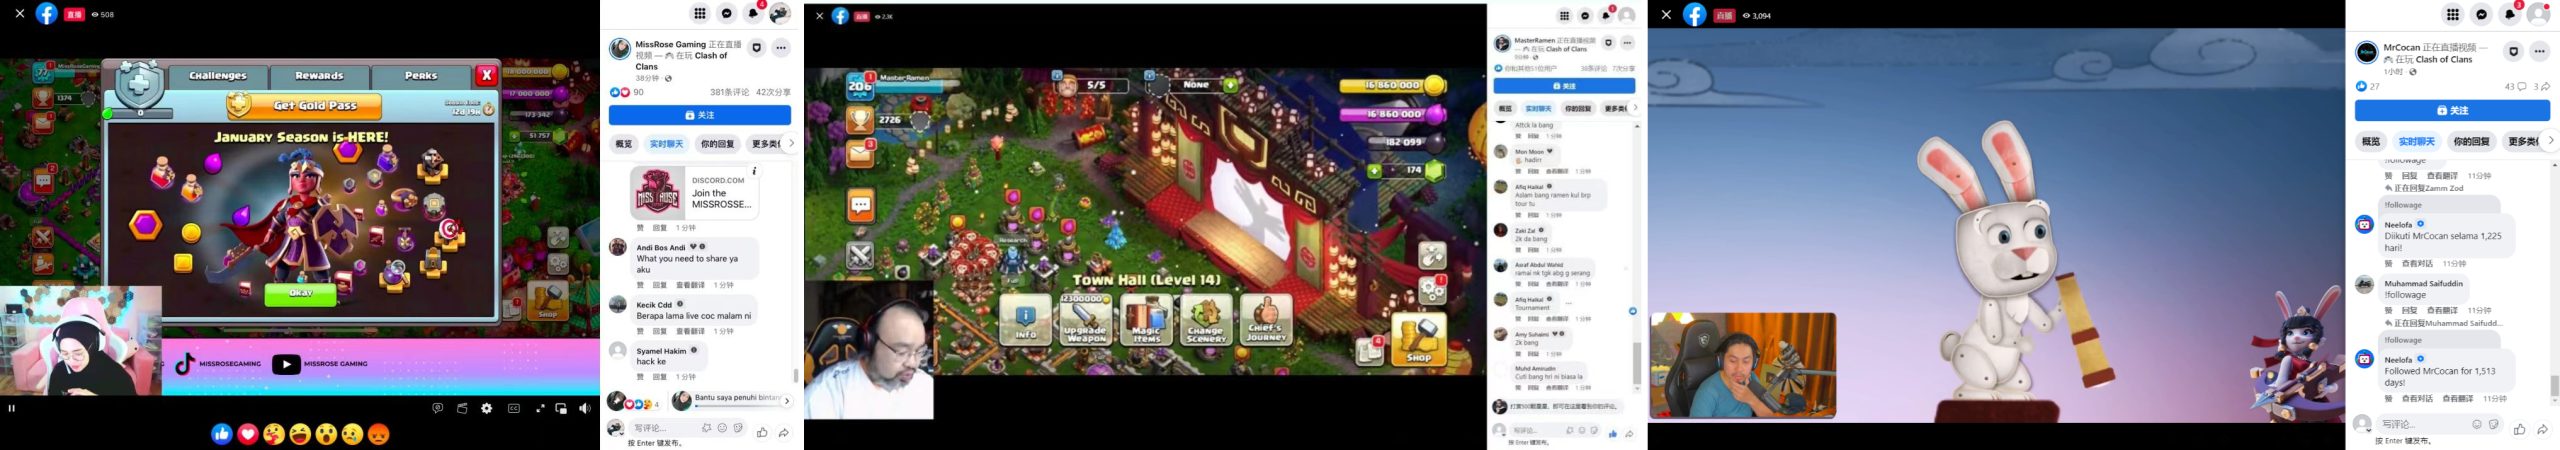 Clash Of Clans Celebrated Year Of The Rabbit With Massive Online & Offline Events 15